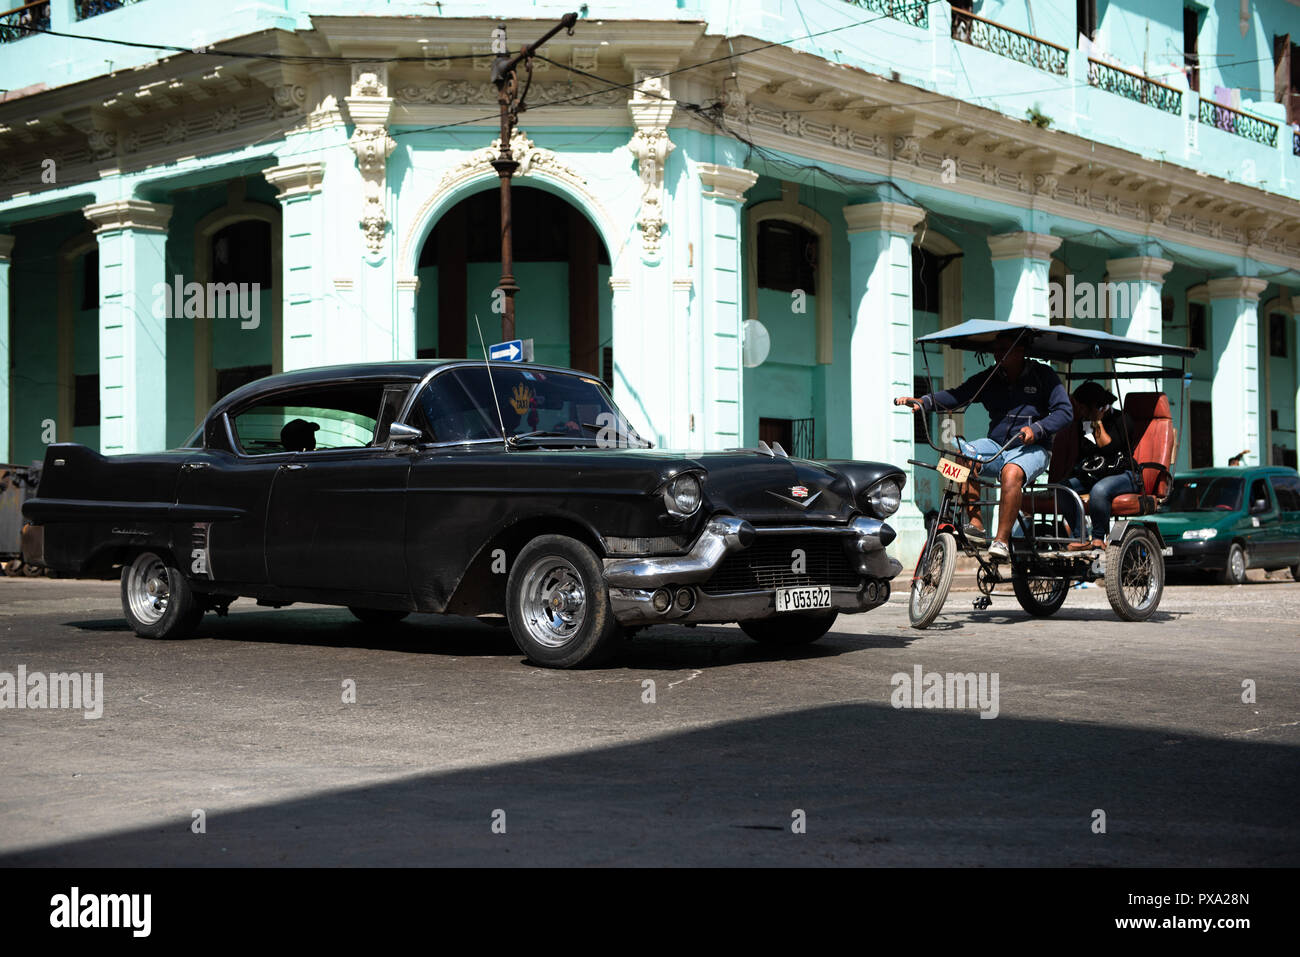 Road in old Havana with old black car and rickshaw. Stock Photo